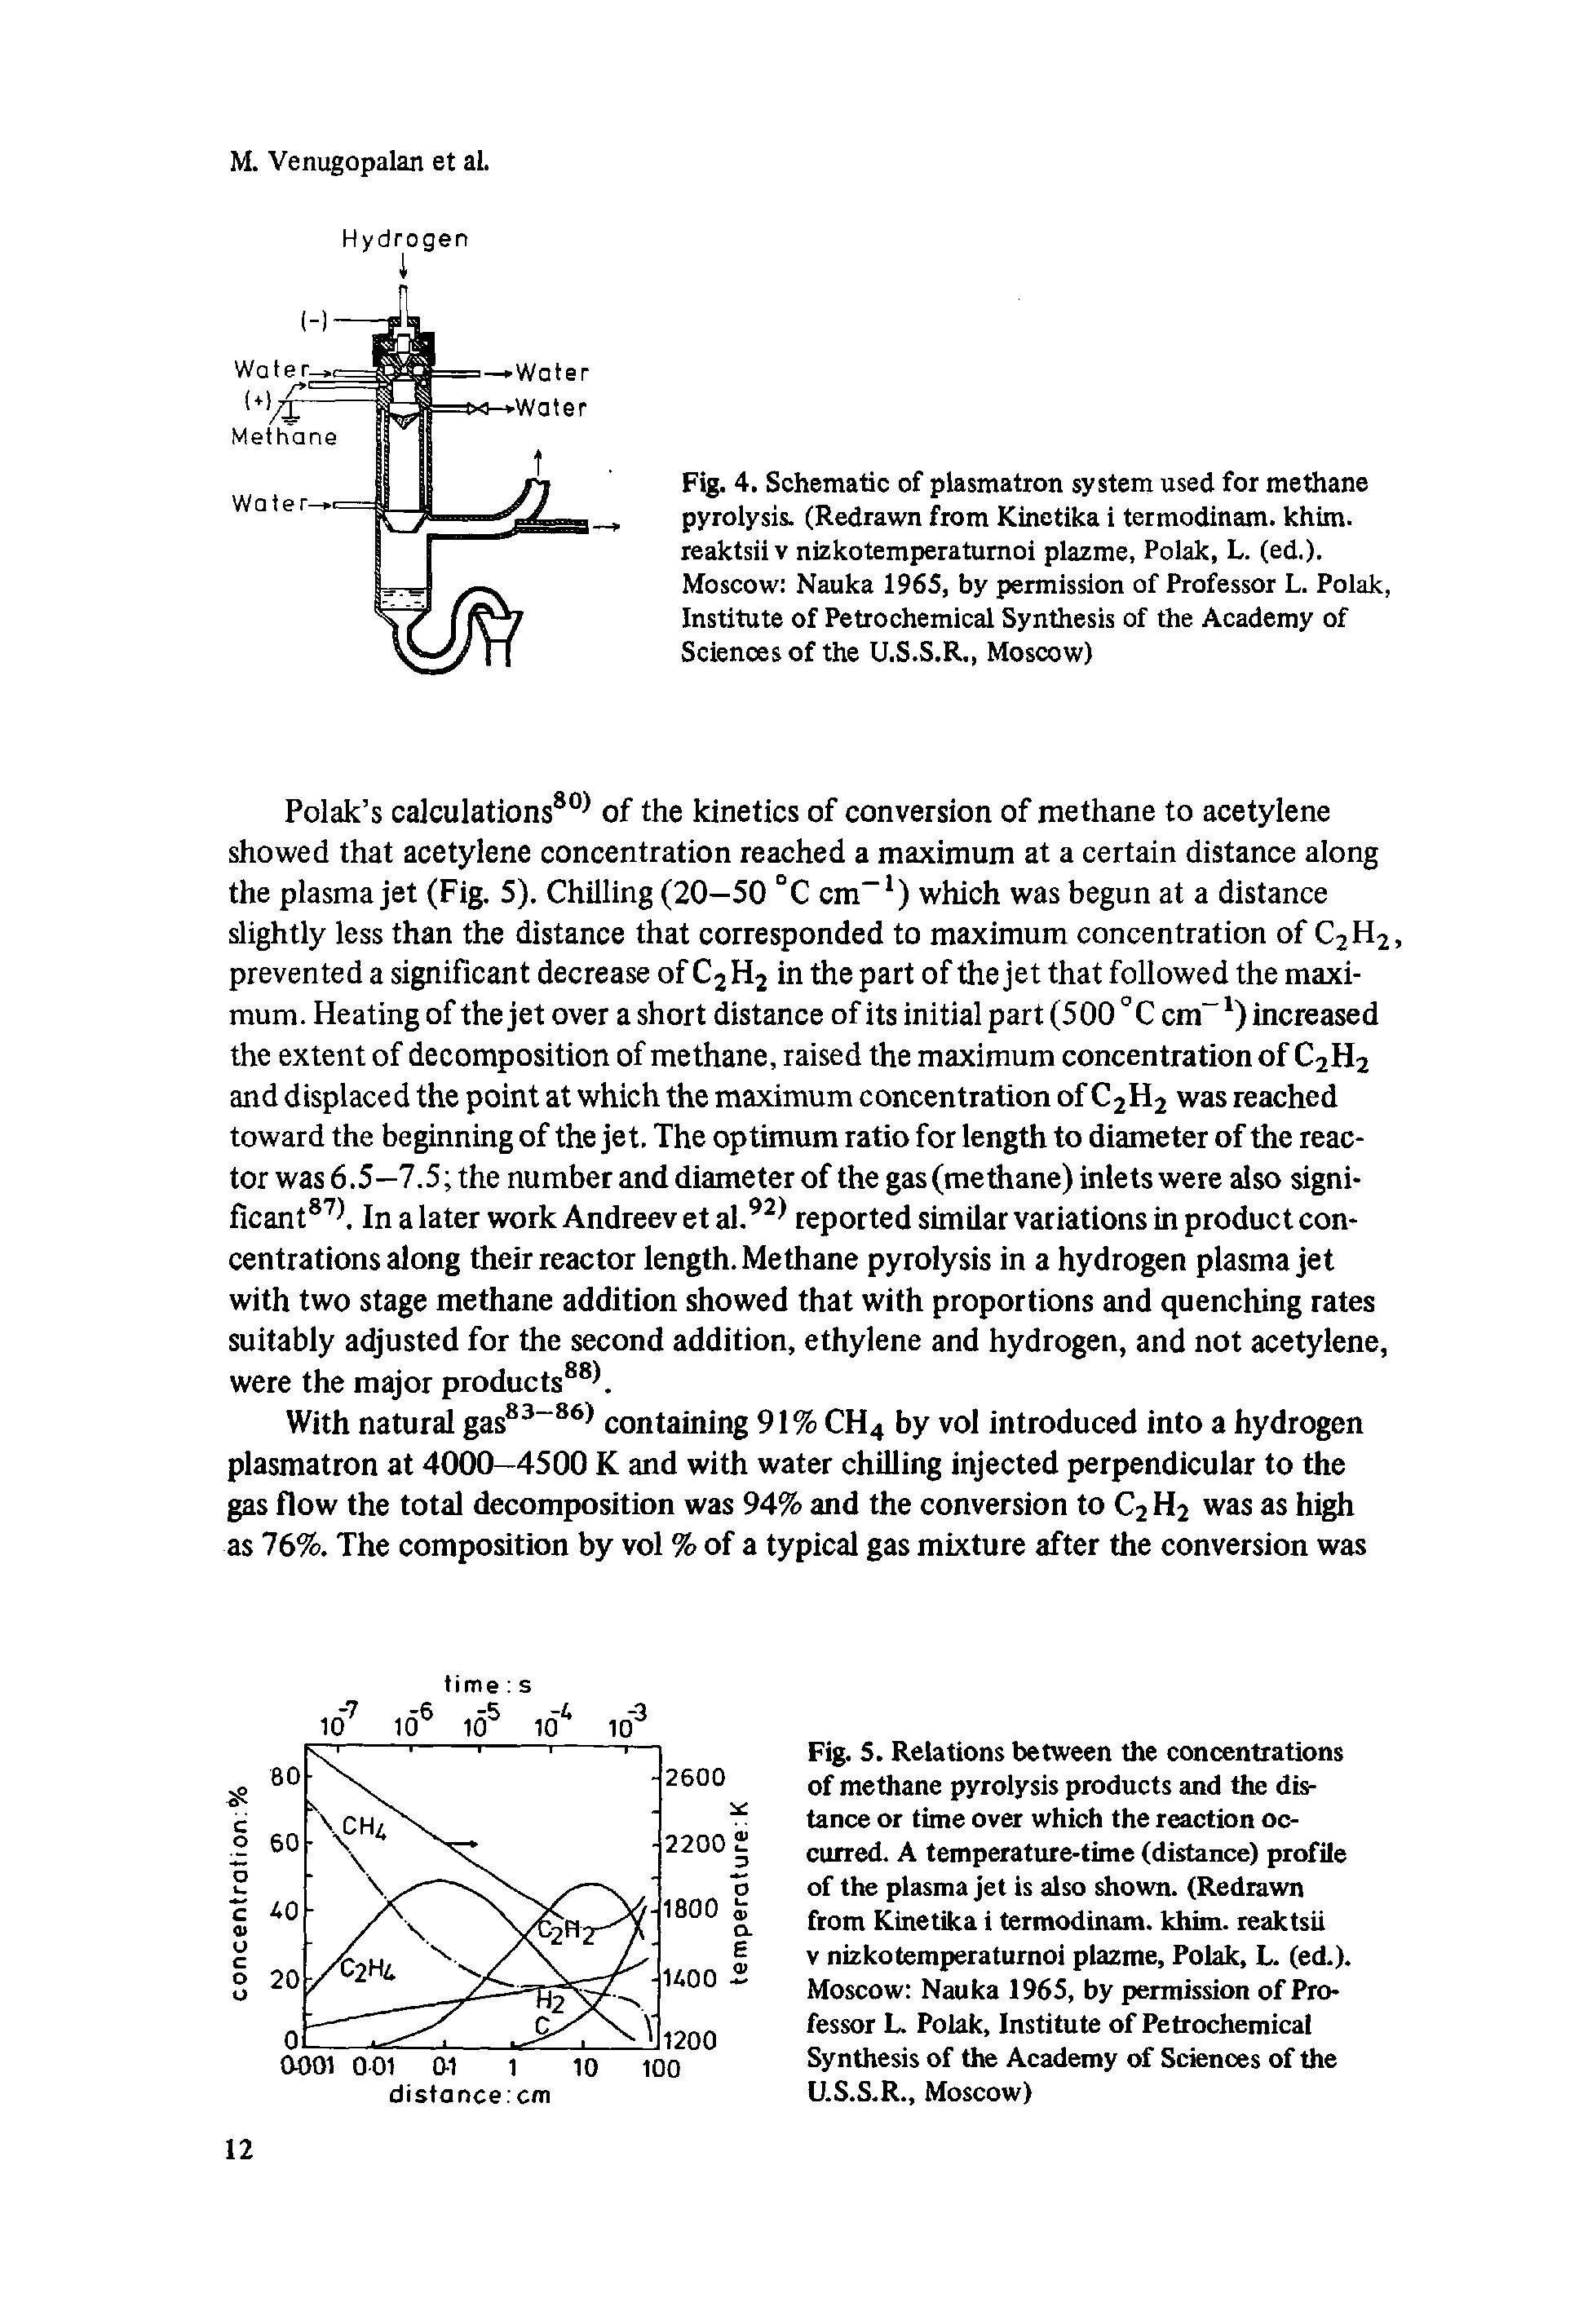 Fig. 4. Schematic of plasmatron system used for methane pyrolysis. (Redrawn from Kinetika i termodinam. khim. reaktsii v nizkotemperaturnoi plazme, Polak, L. (ed.). Moscow Nauka 1965, by permission of Professor L. Polak, Institute of Petrochemical Synthesis of the Academy of Sciences of the U.S.S.R., Moscow)...